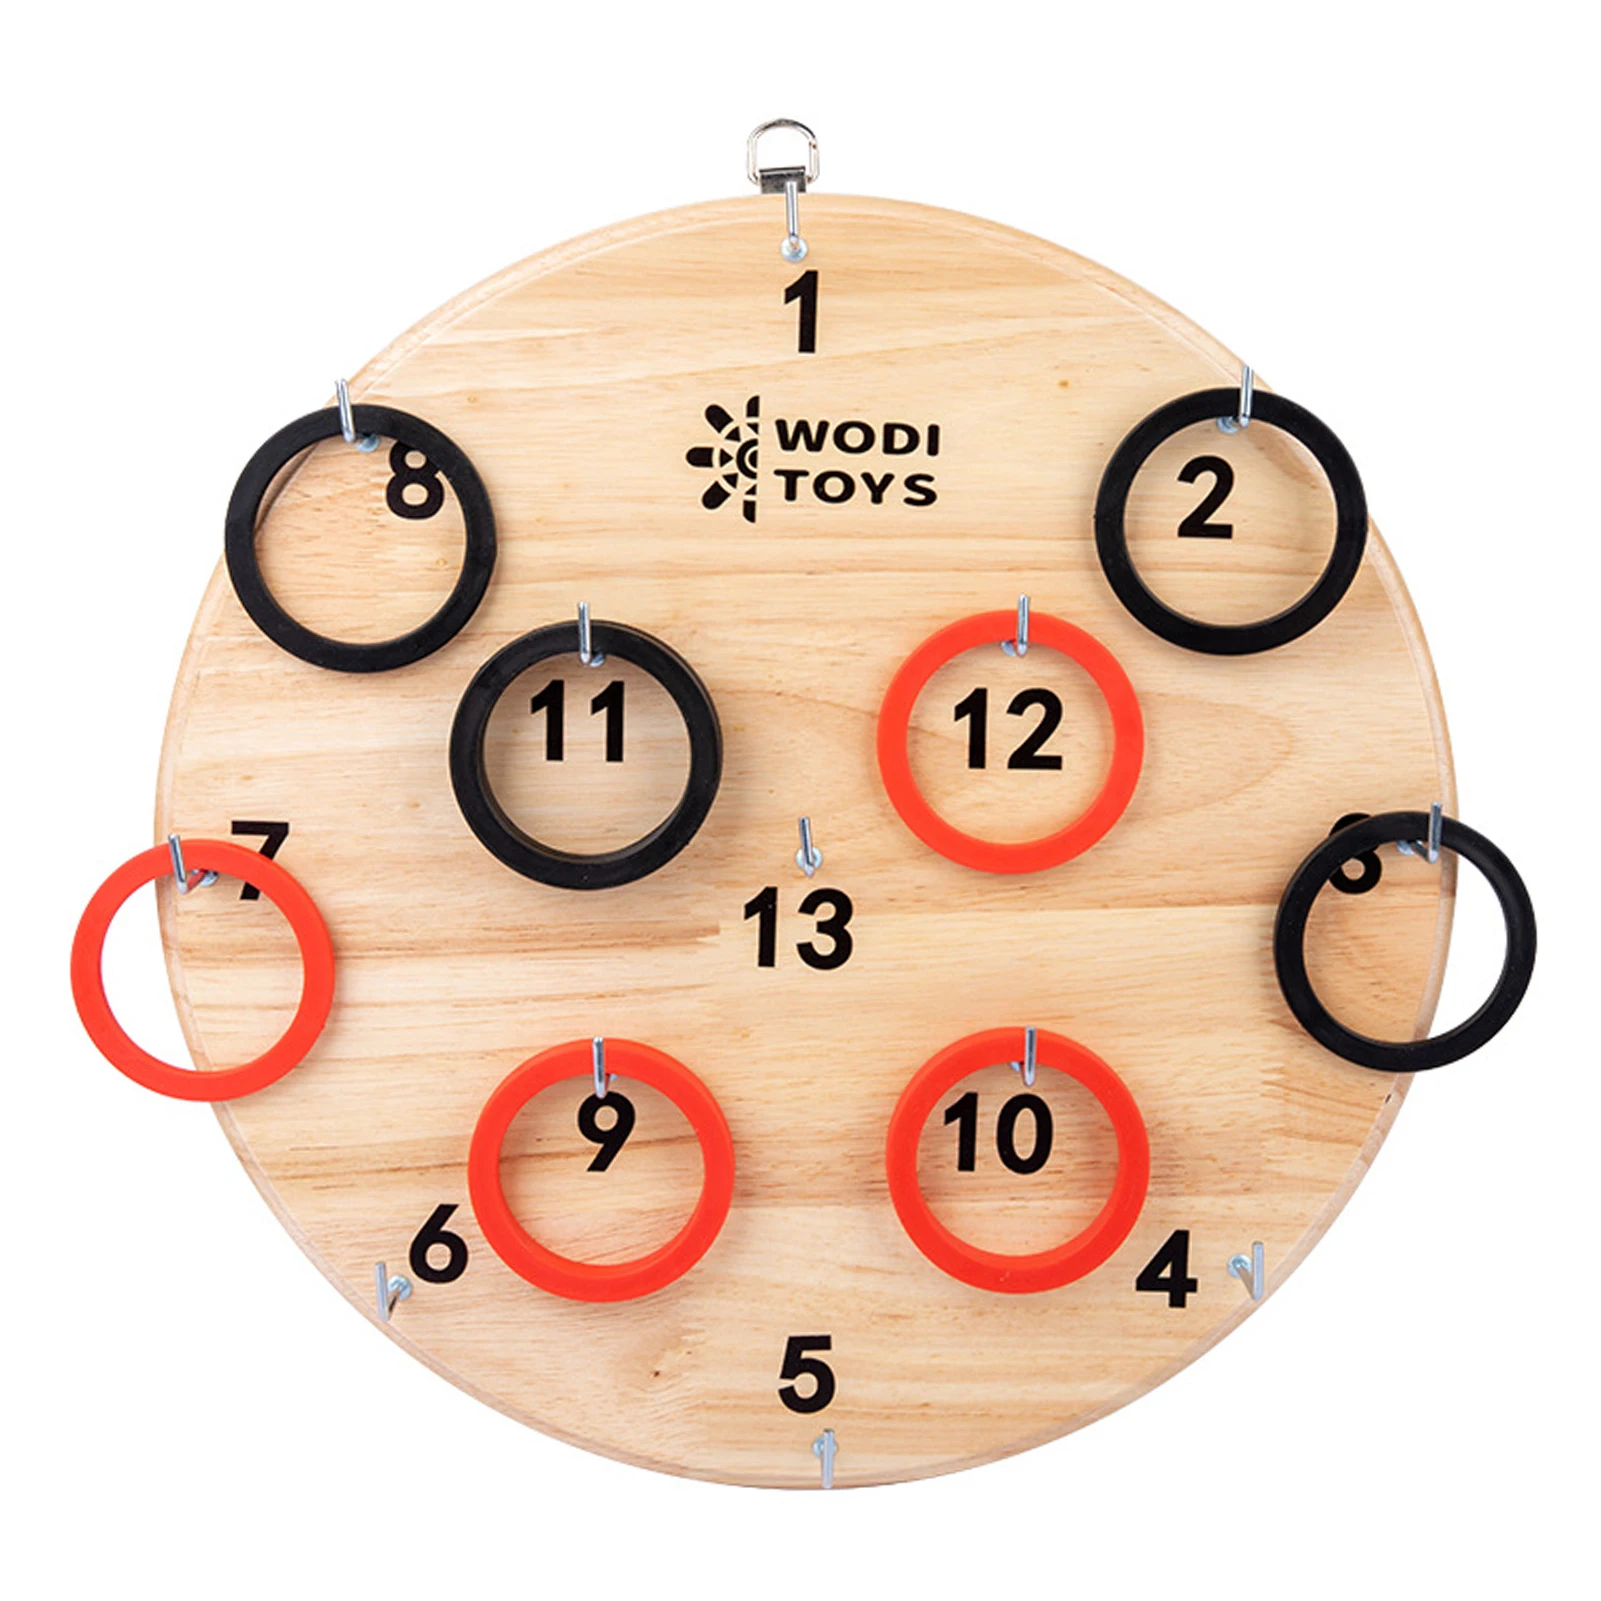 купить Drinking Game Toy Toy Wooden Ring Toss Game Toss Hook Board Games Indoor Wall Toss Ring Game Set For Kids Adults в интернет-магазине